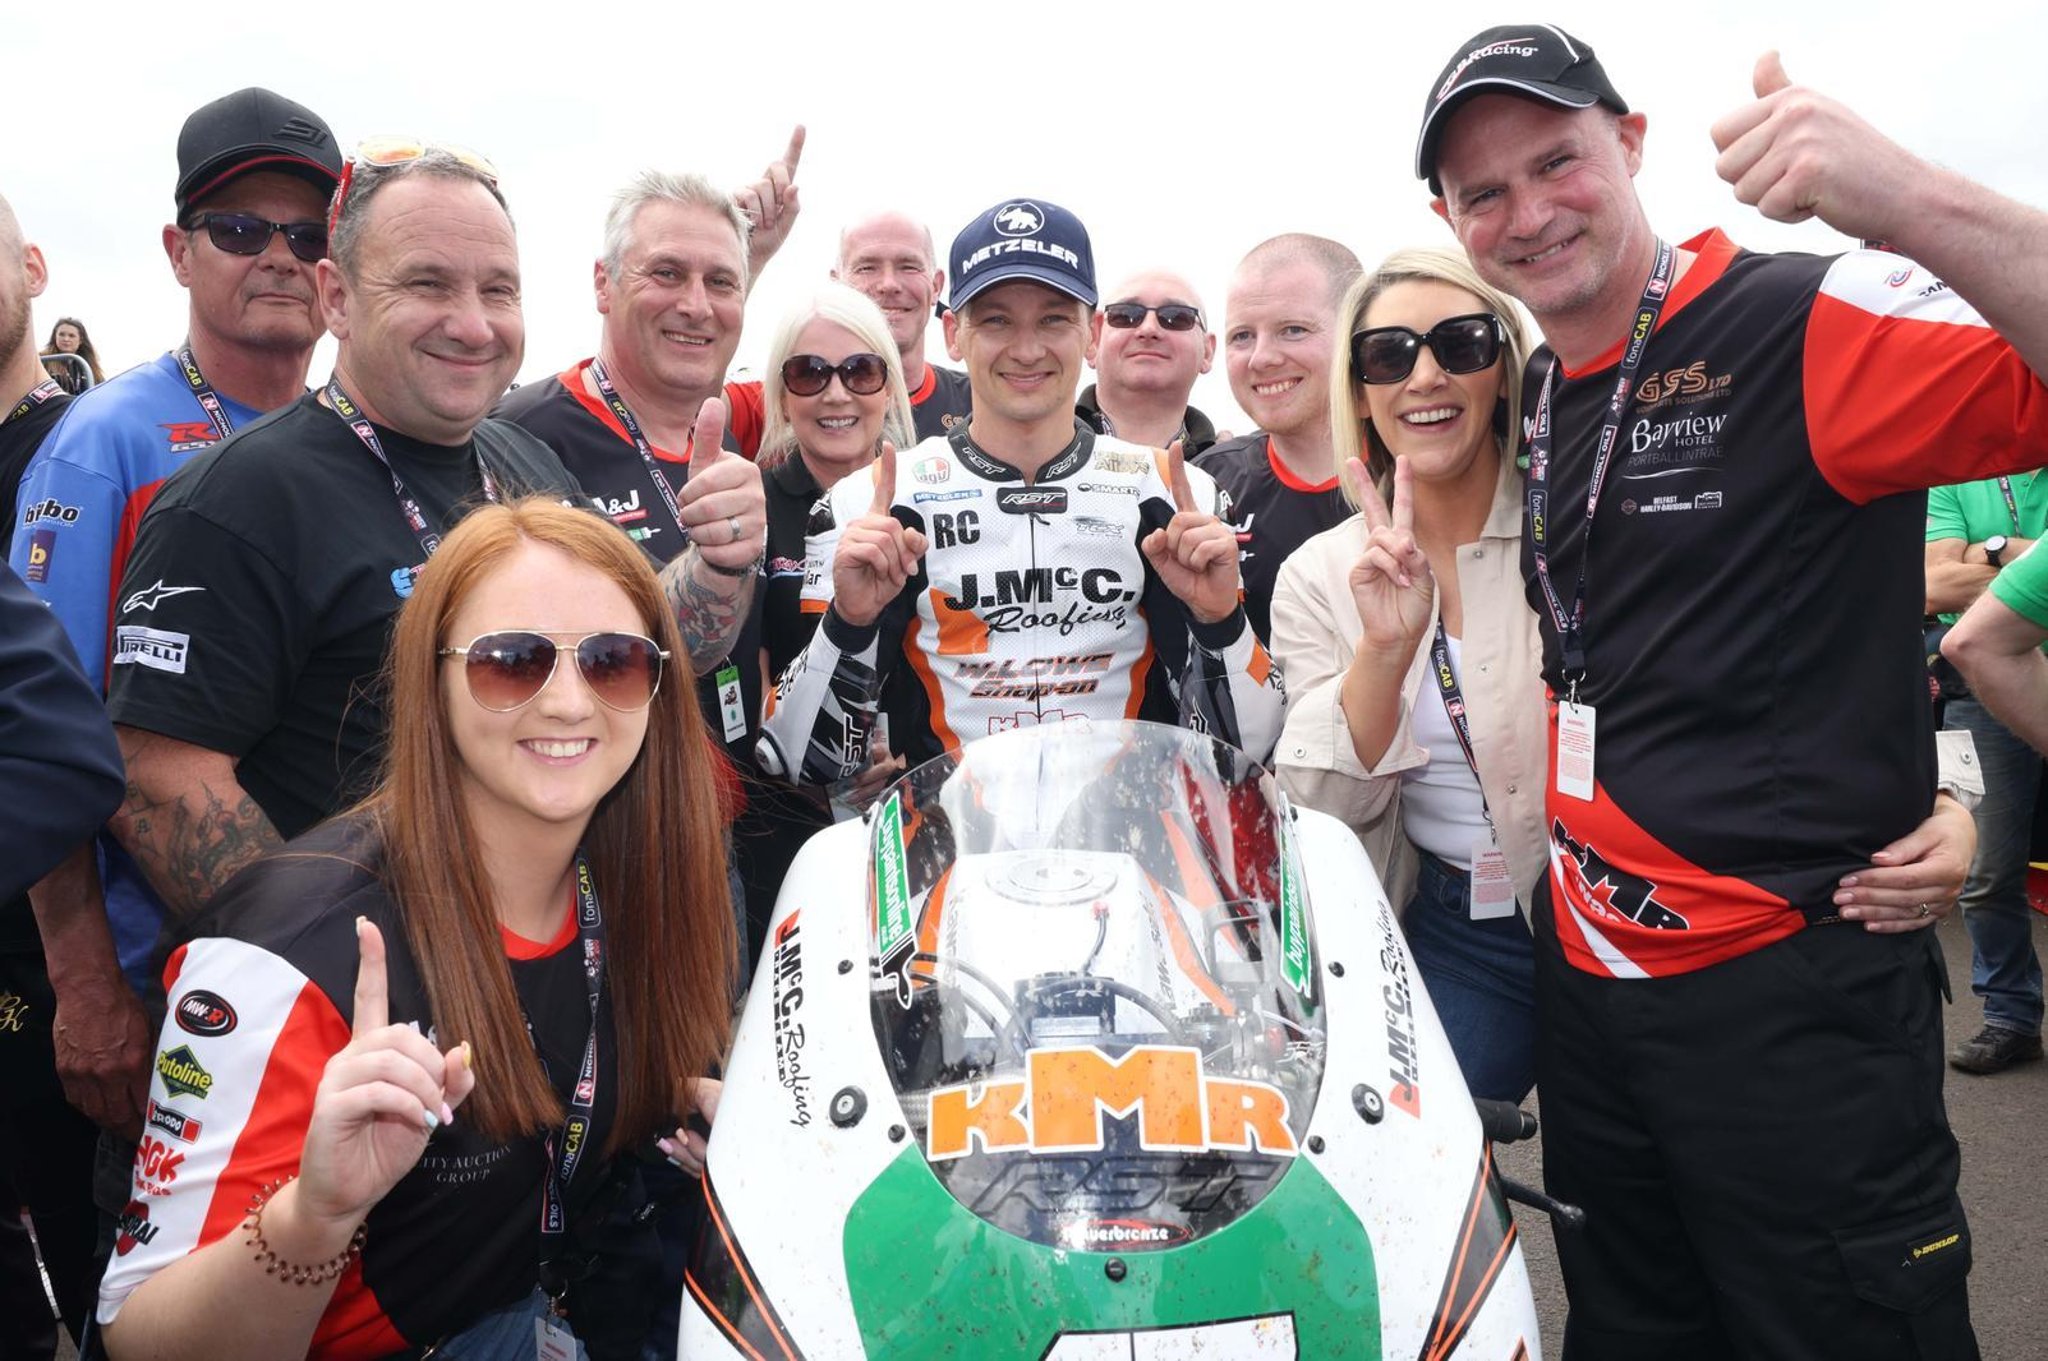 NW200: Ryan Farquhar says 'I've had enough' and vows to fight decision to strip Richard Cooper of Supertwin wins